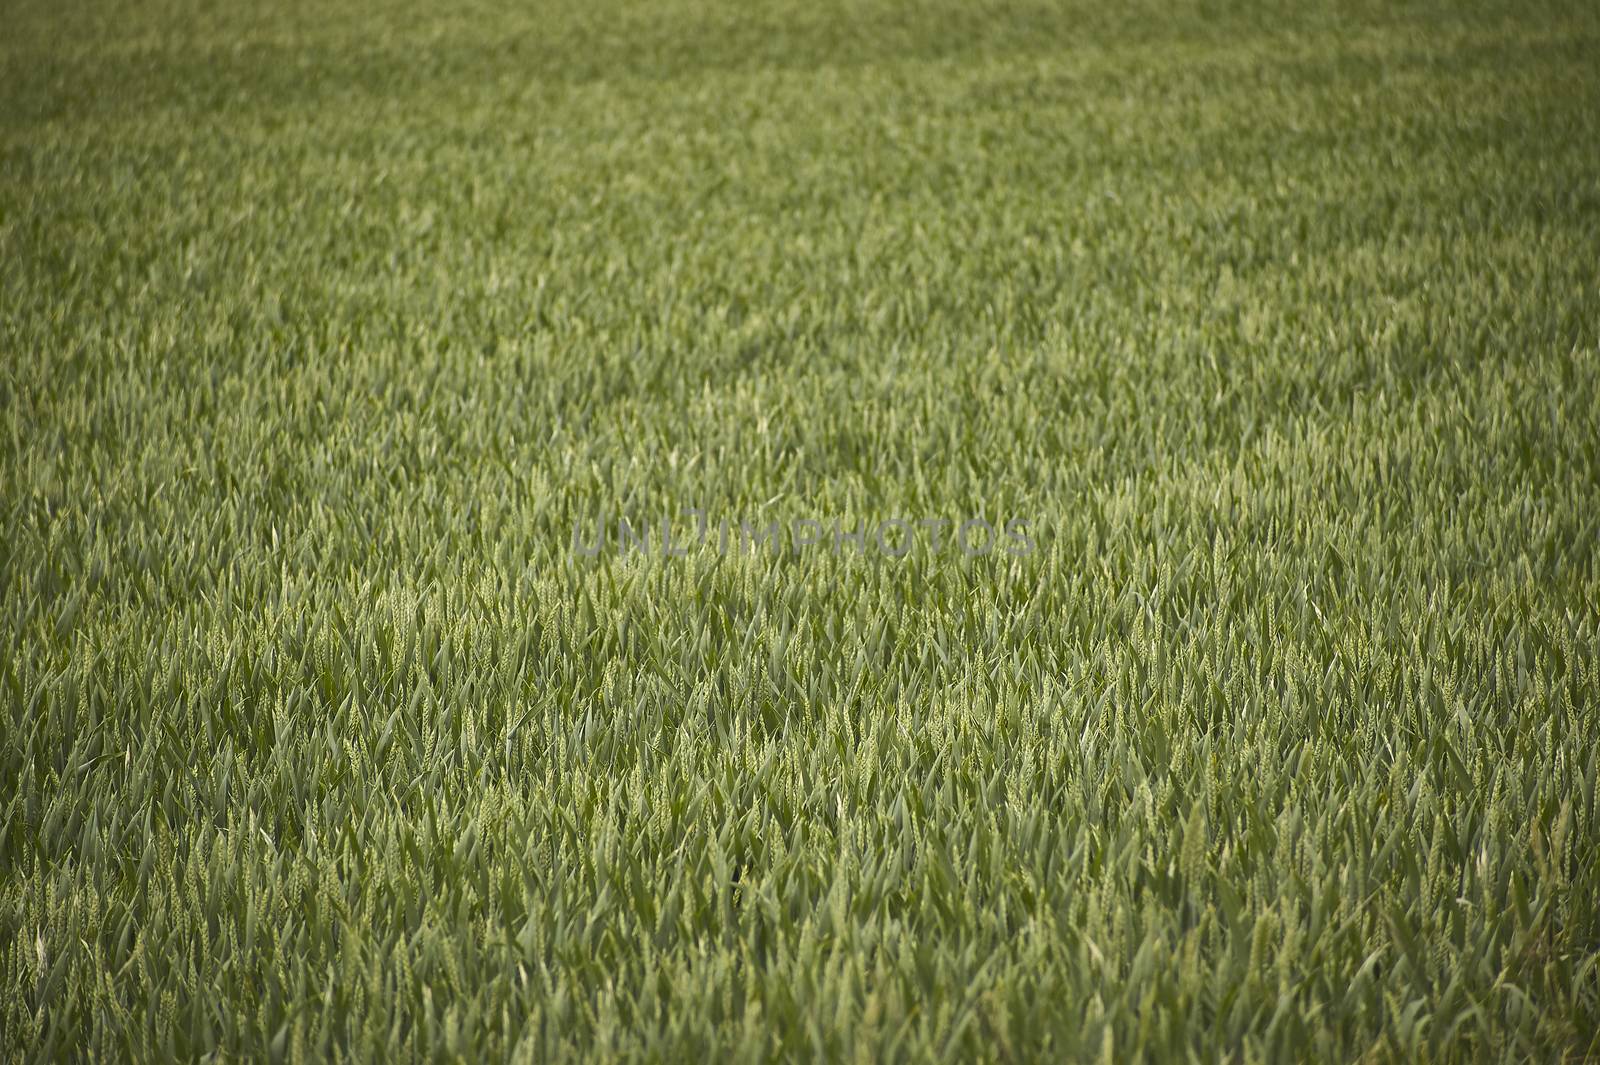 Barley texture in a field for its cultivation in a state of growth still premature.